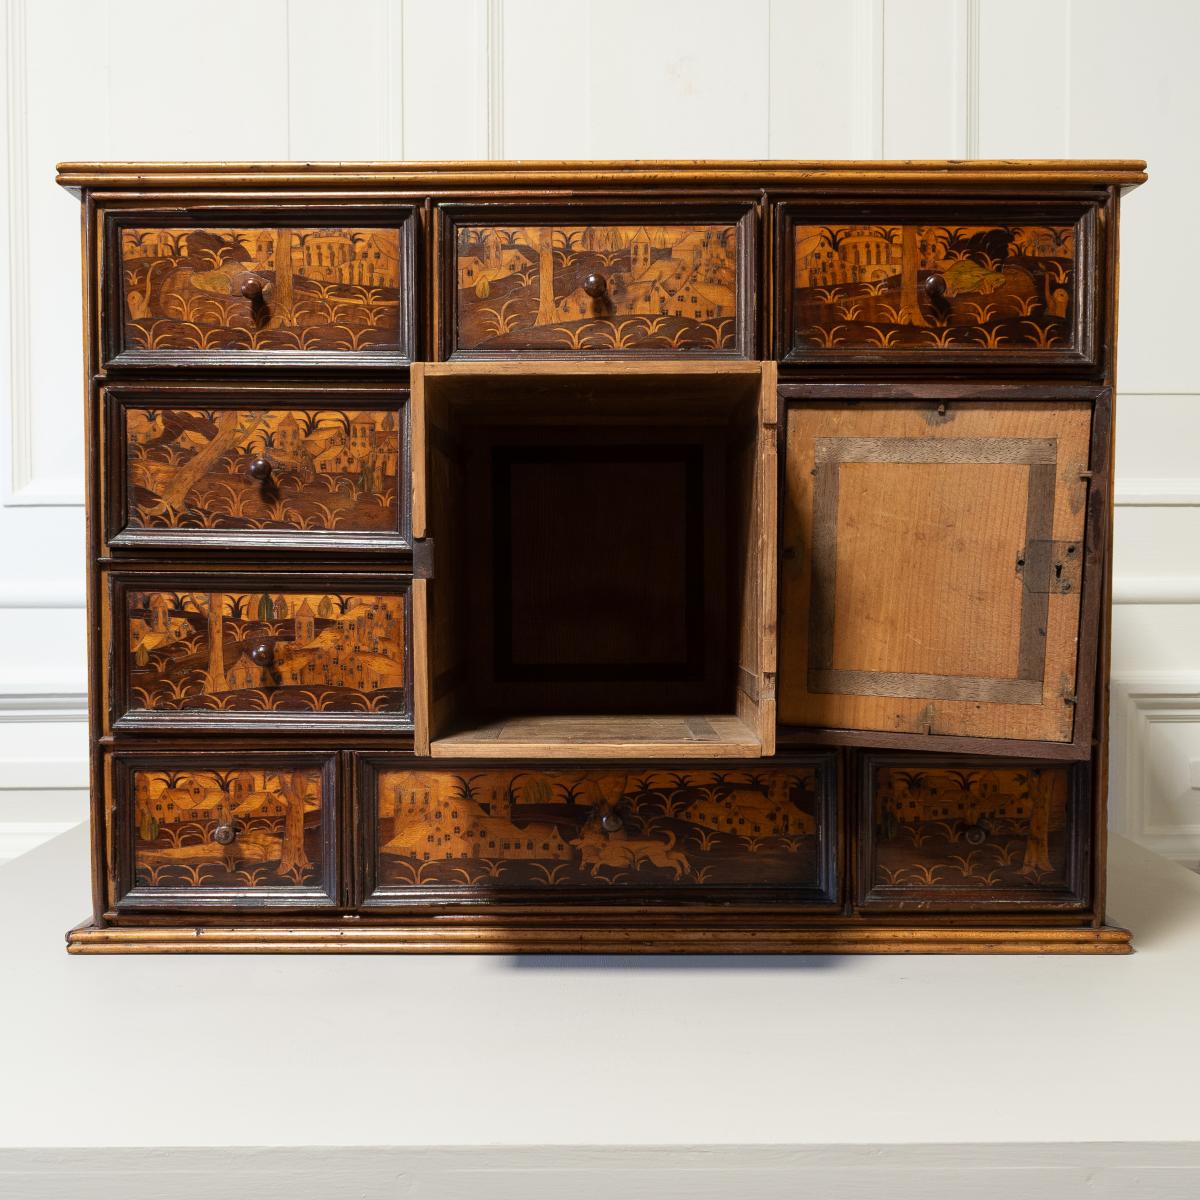 A fruitwood, marquetry table-top cabinet Augsburg, Germany, circa 1600